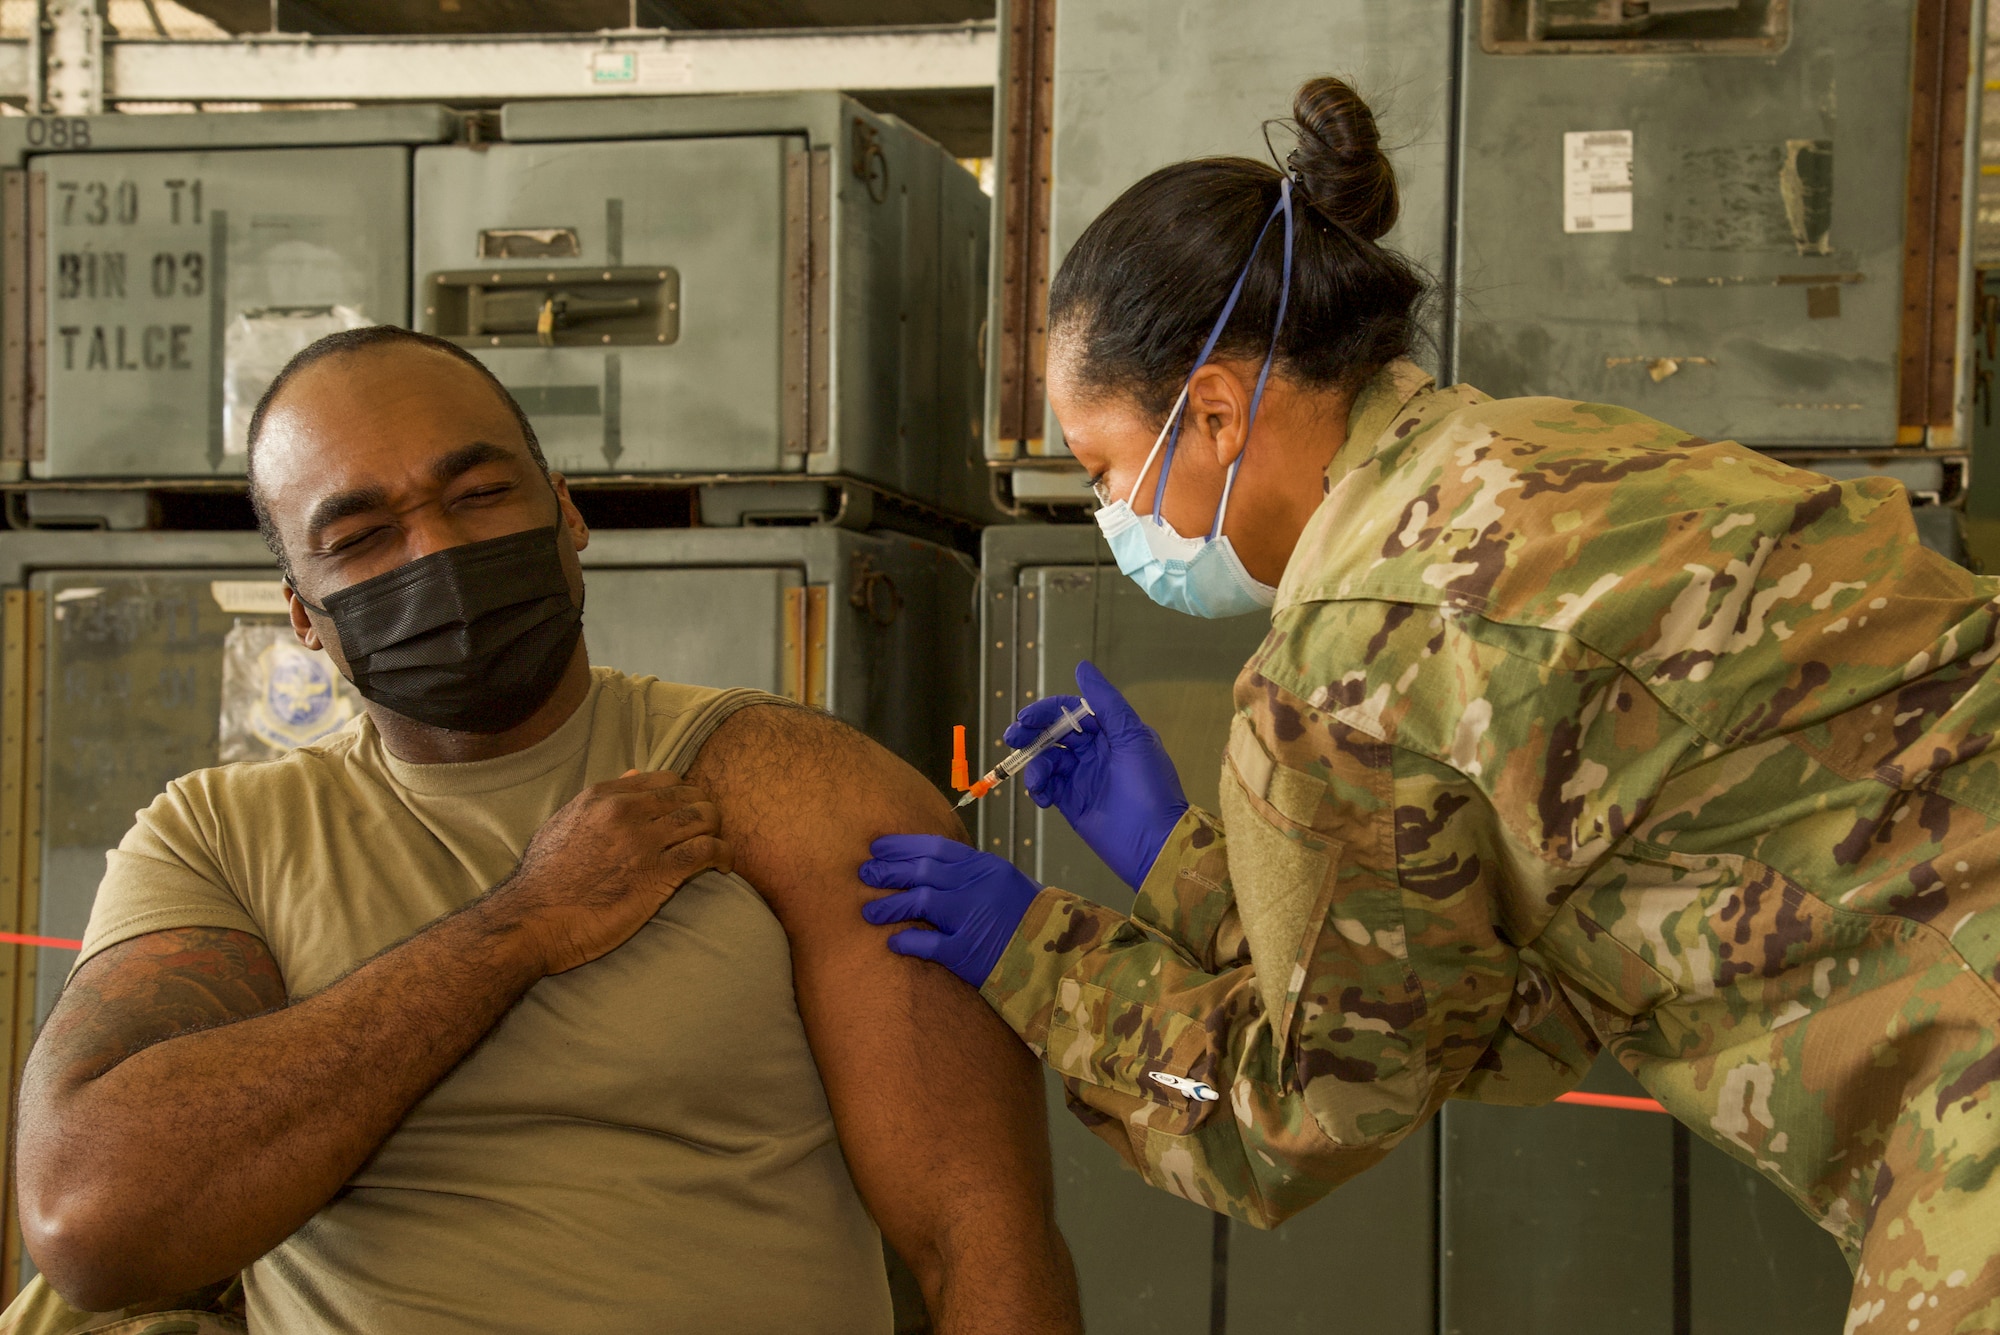 A 108th Wing Airman receives a dose of the COVID-19 vaccination at Joint Base McGuire-Dix-Lakehurst, N.J., Jan. 9, 2021. This was the first time the 108th Wing administered the COVID-19 vaccines to wing members.